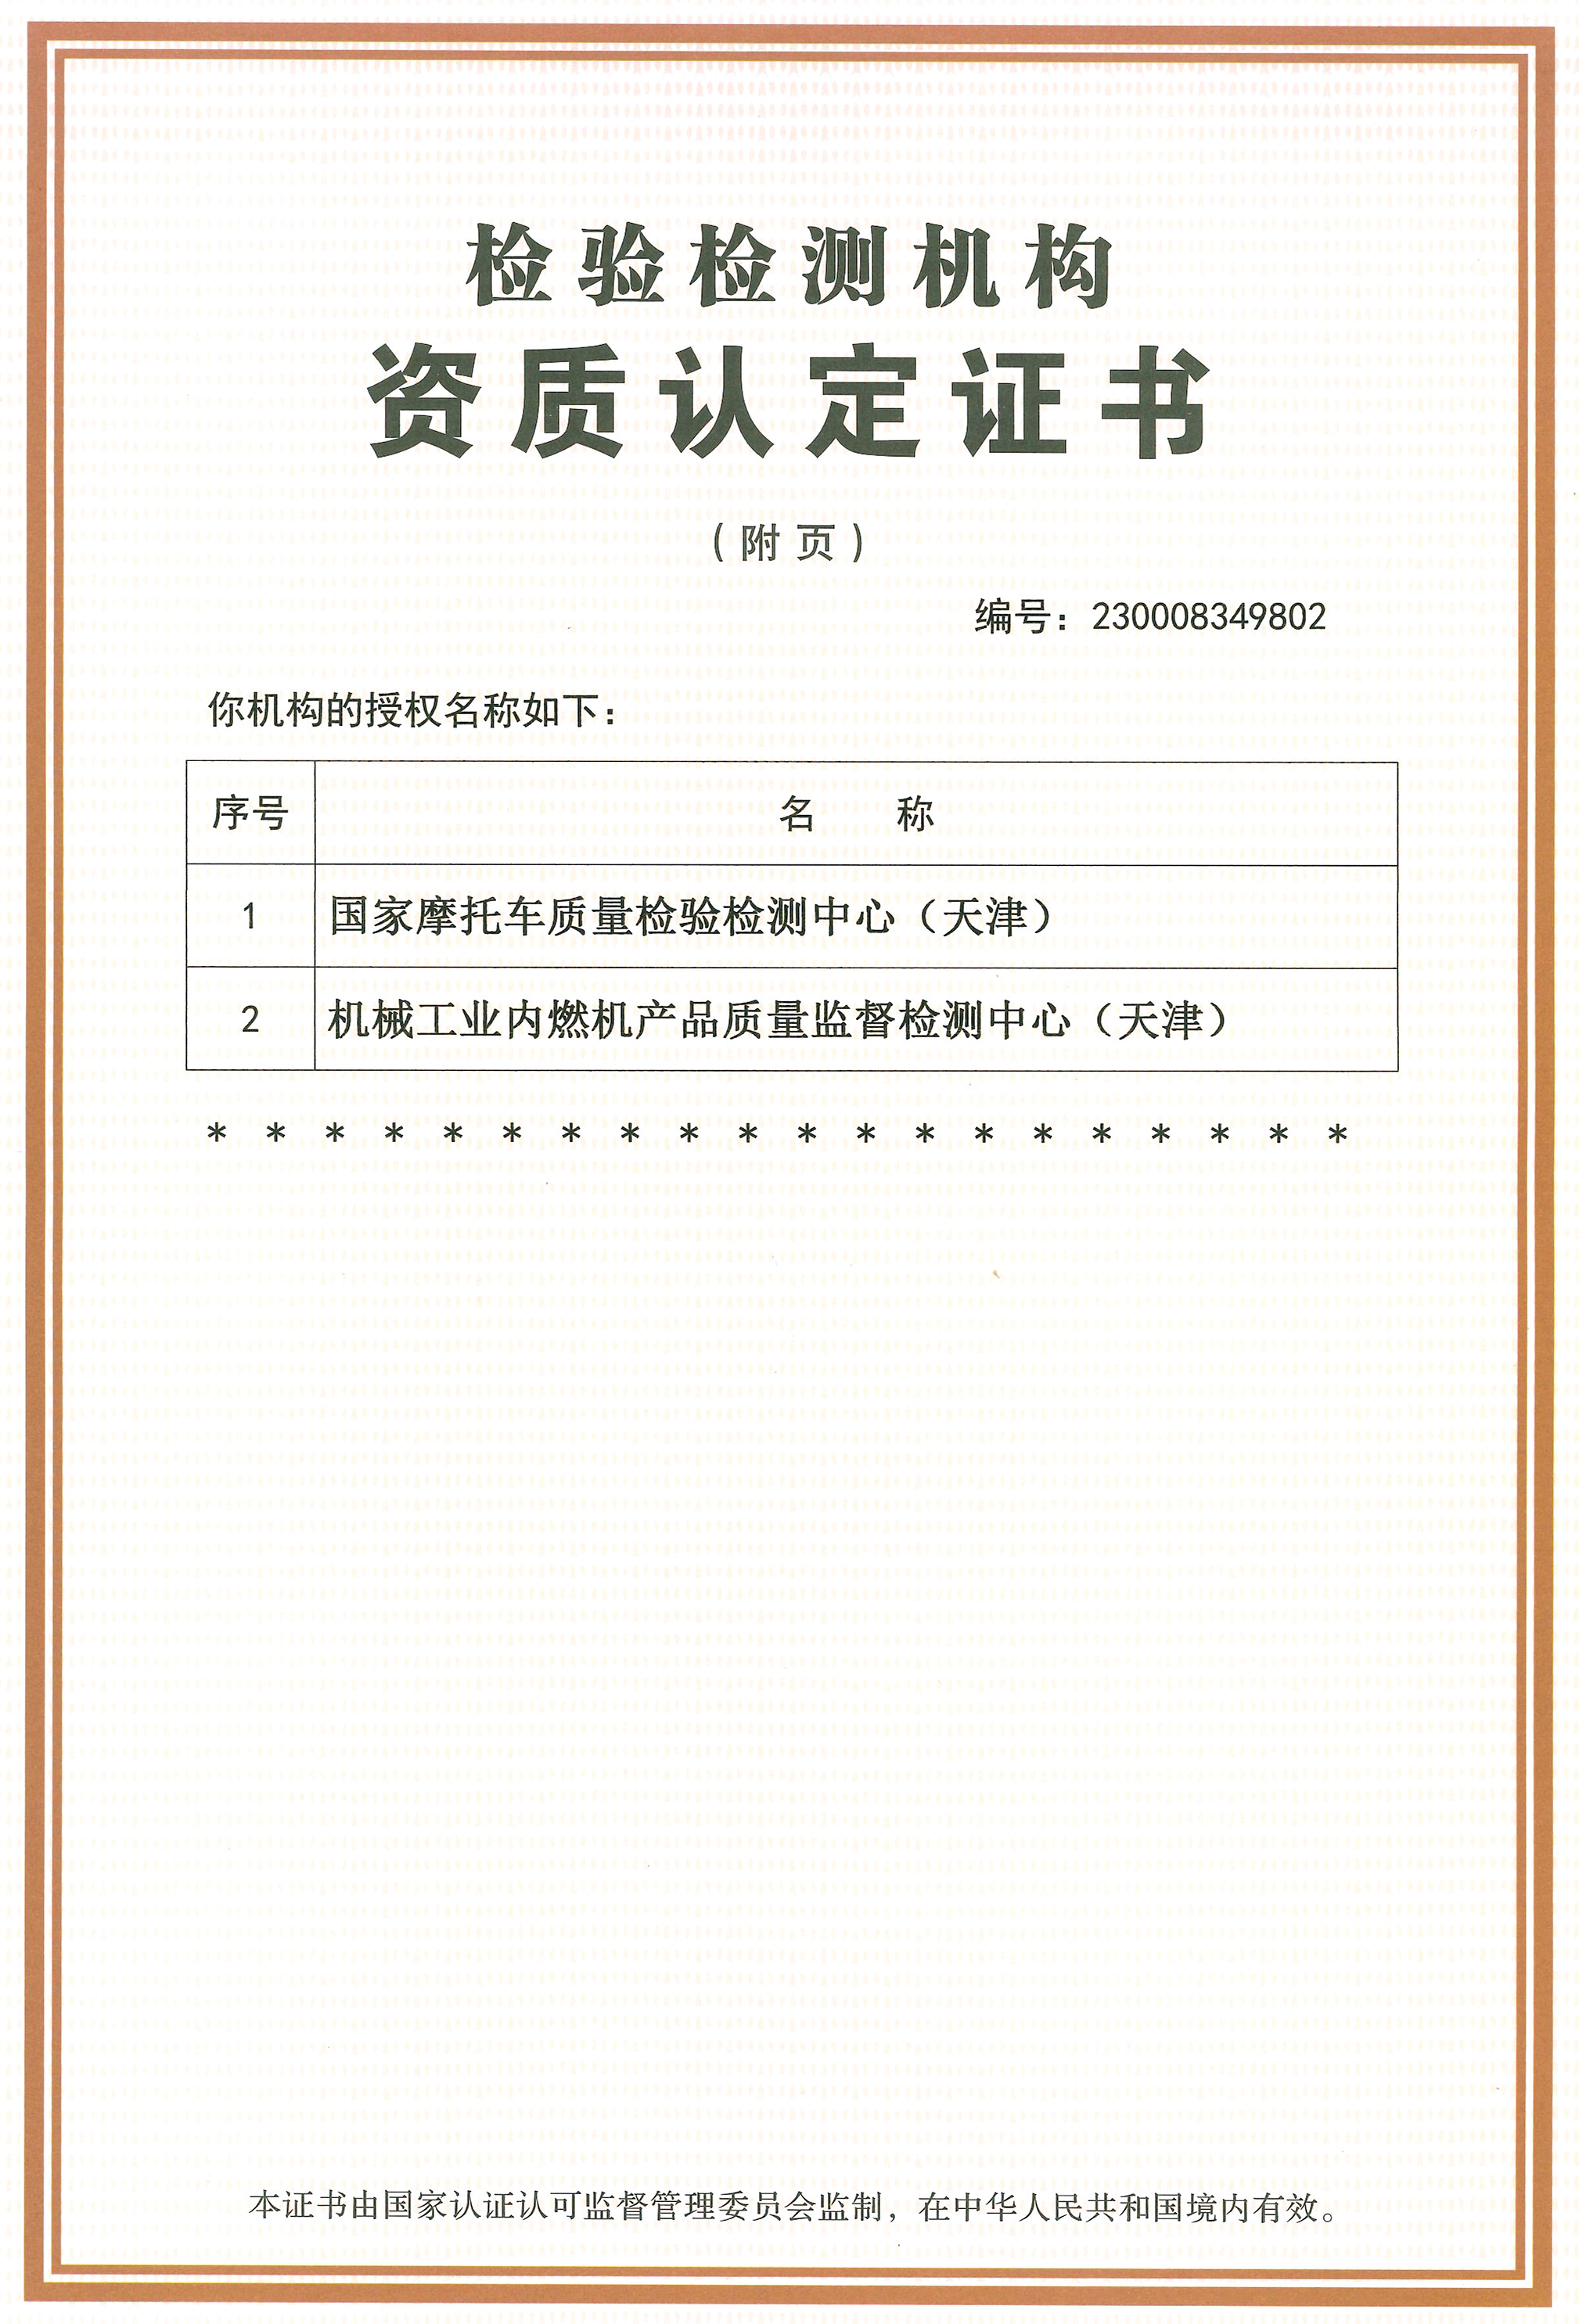 Certificate for qualification accreditation of Tianjin Motorcycle Quality Supervision & Testing Institute(attached pages)